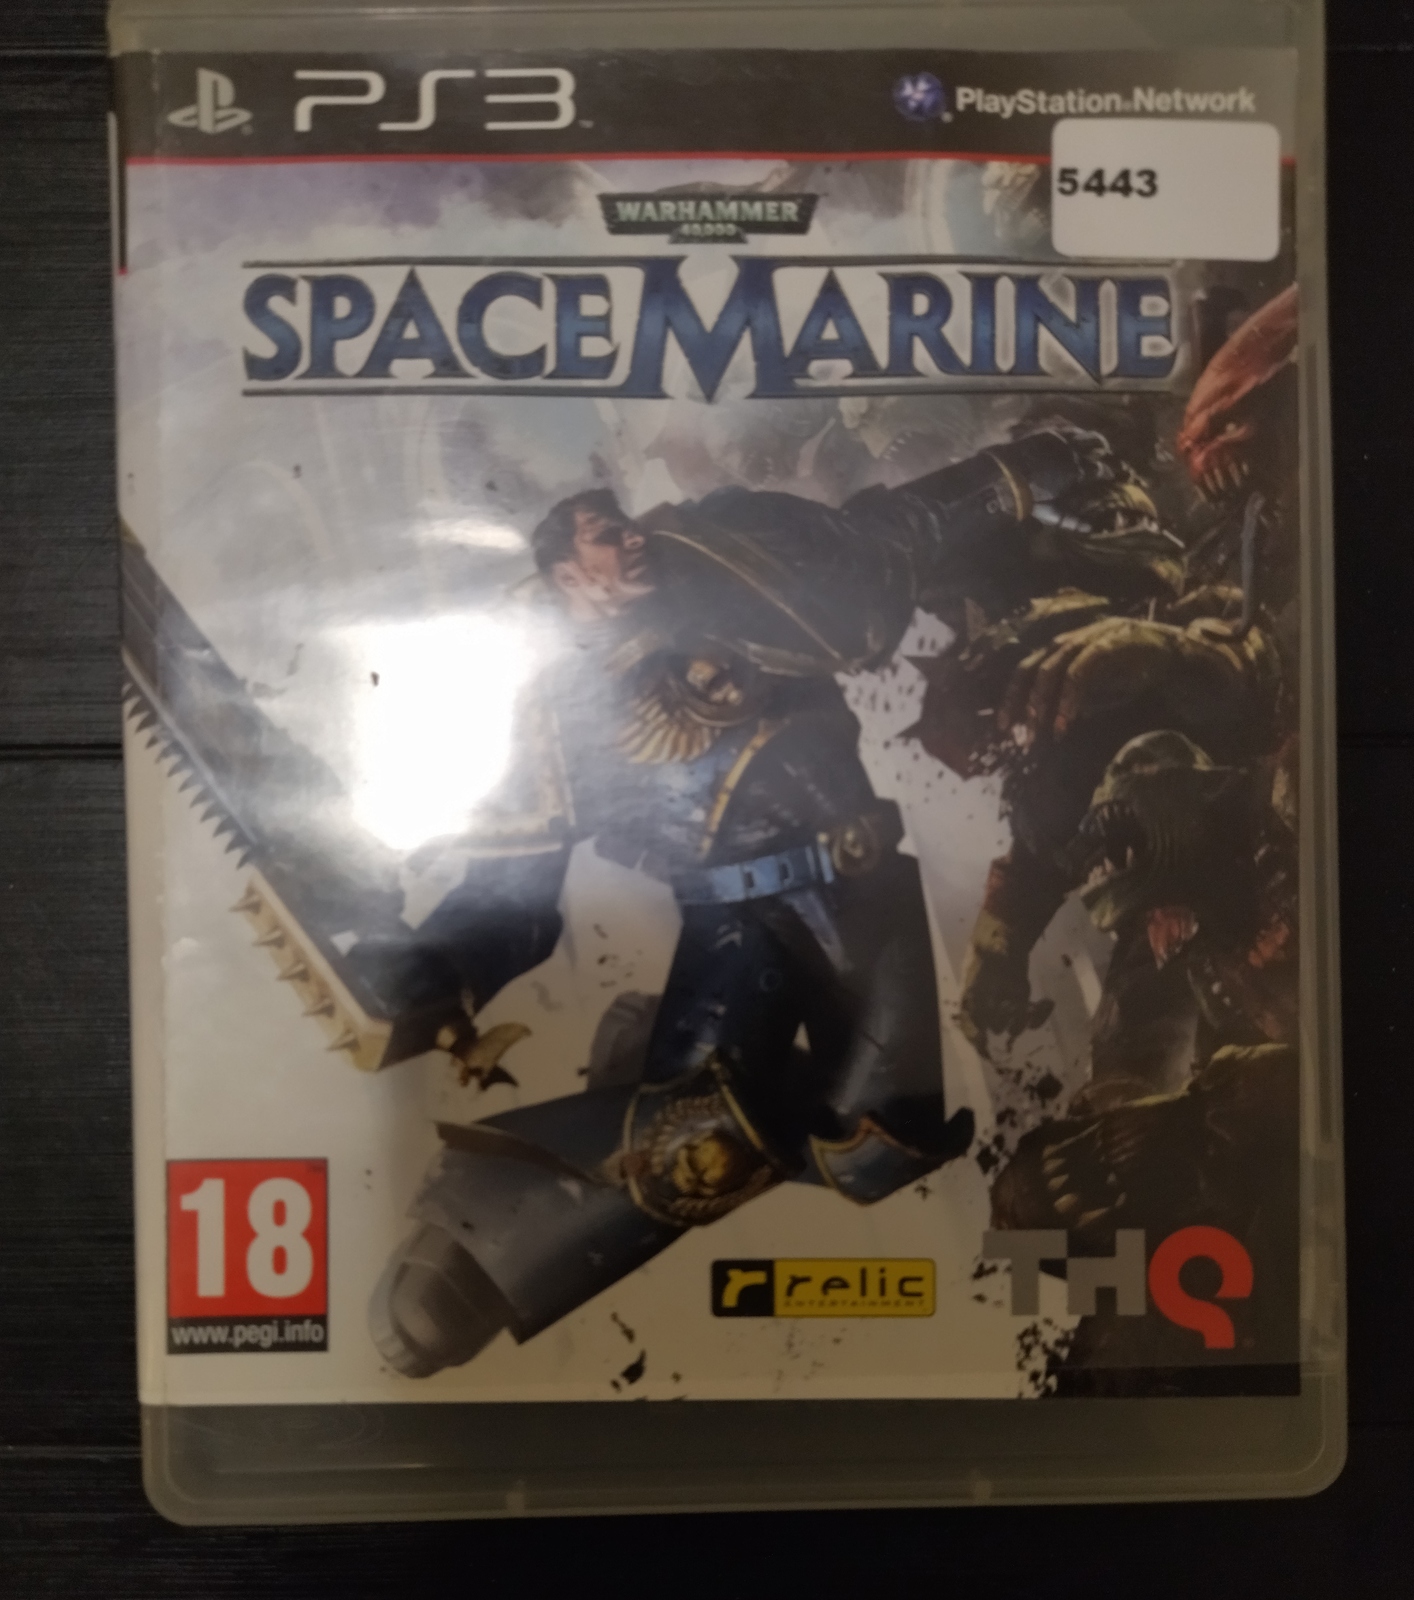 Primary image for Warhammer 40,000: Space Marine (PS3)